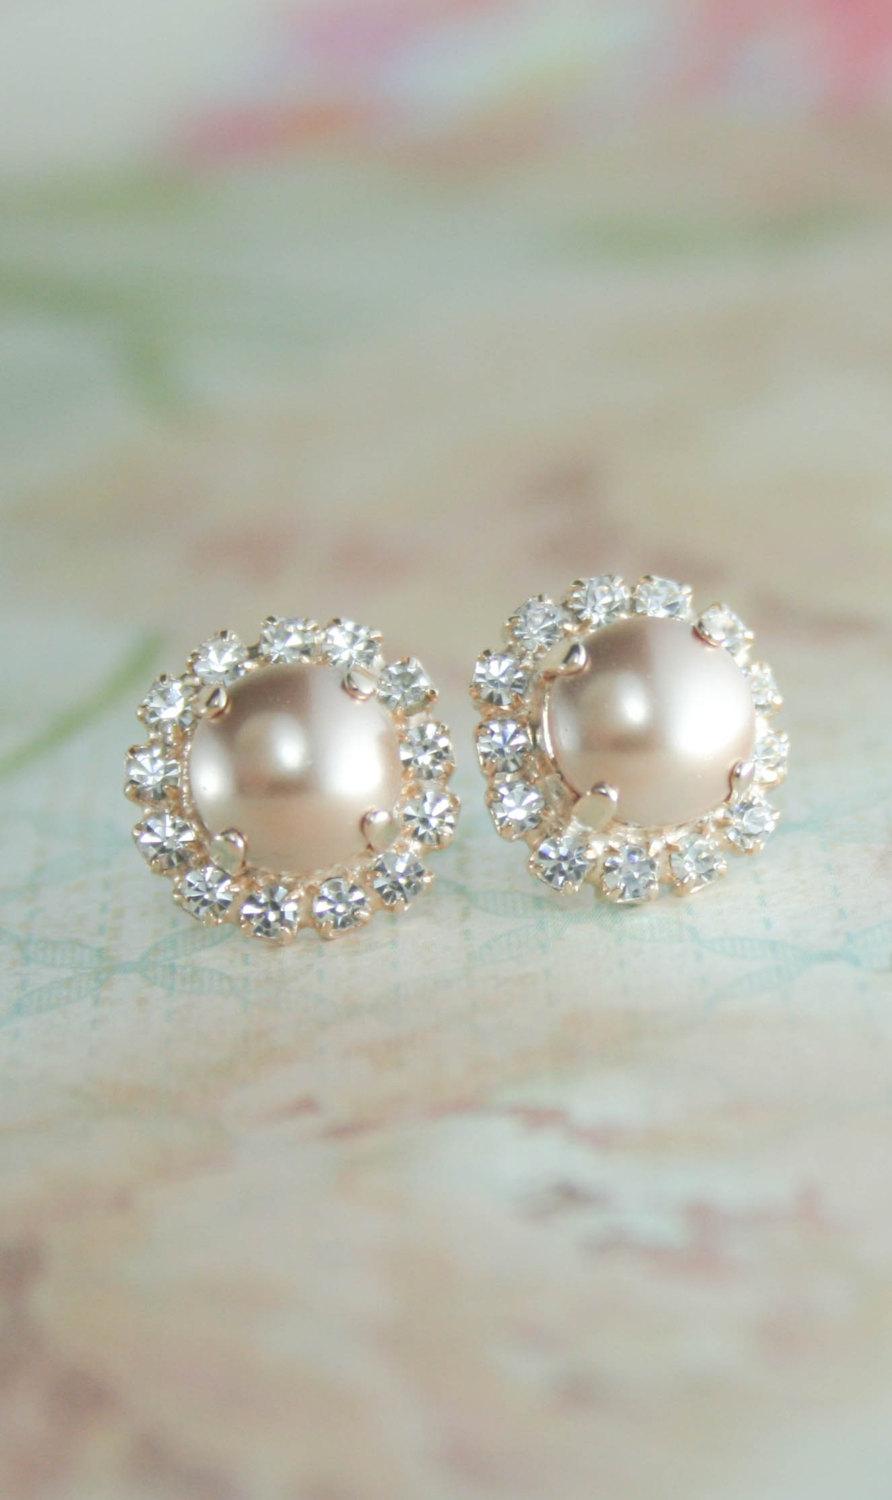 Mariage - rose gold pearl earrings,rose gold wedding jewelry,rose gold earrings.rose gold bridal earrings,rose gold stud pearl earrings,pearl earrings